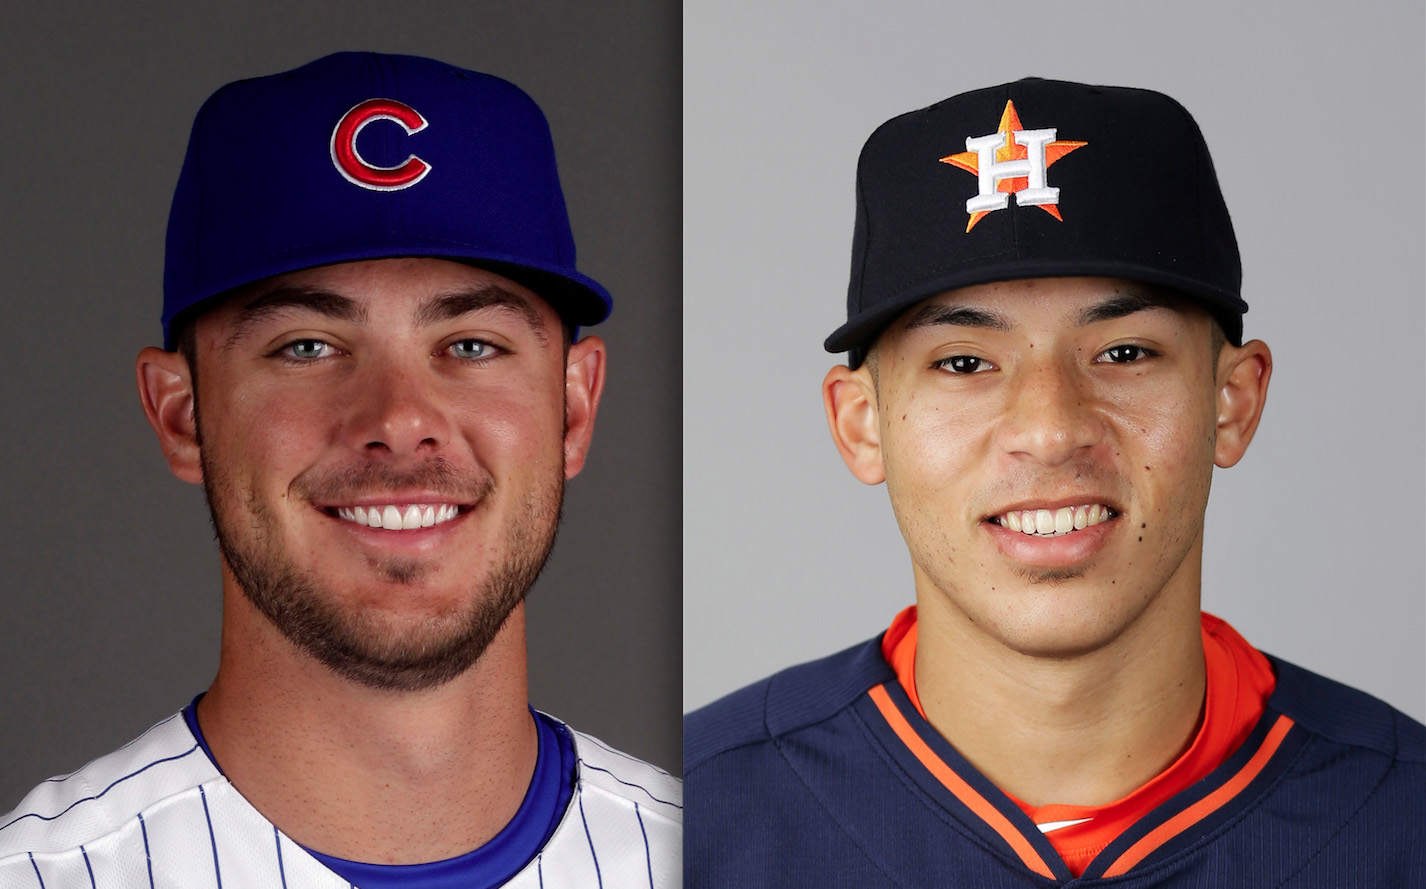 2015 MLB rookies of the year Kris Bryant of the Chicago Cubs and Carlos Correa of the Houston Astros.